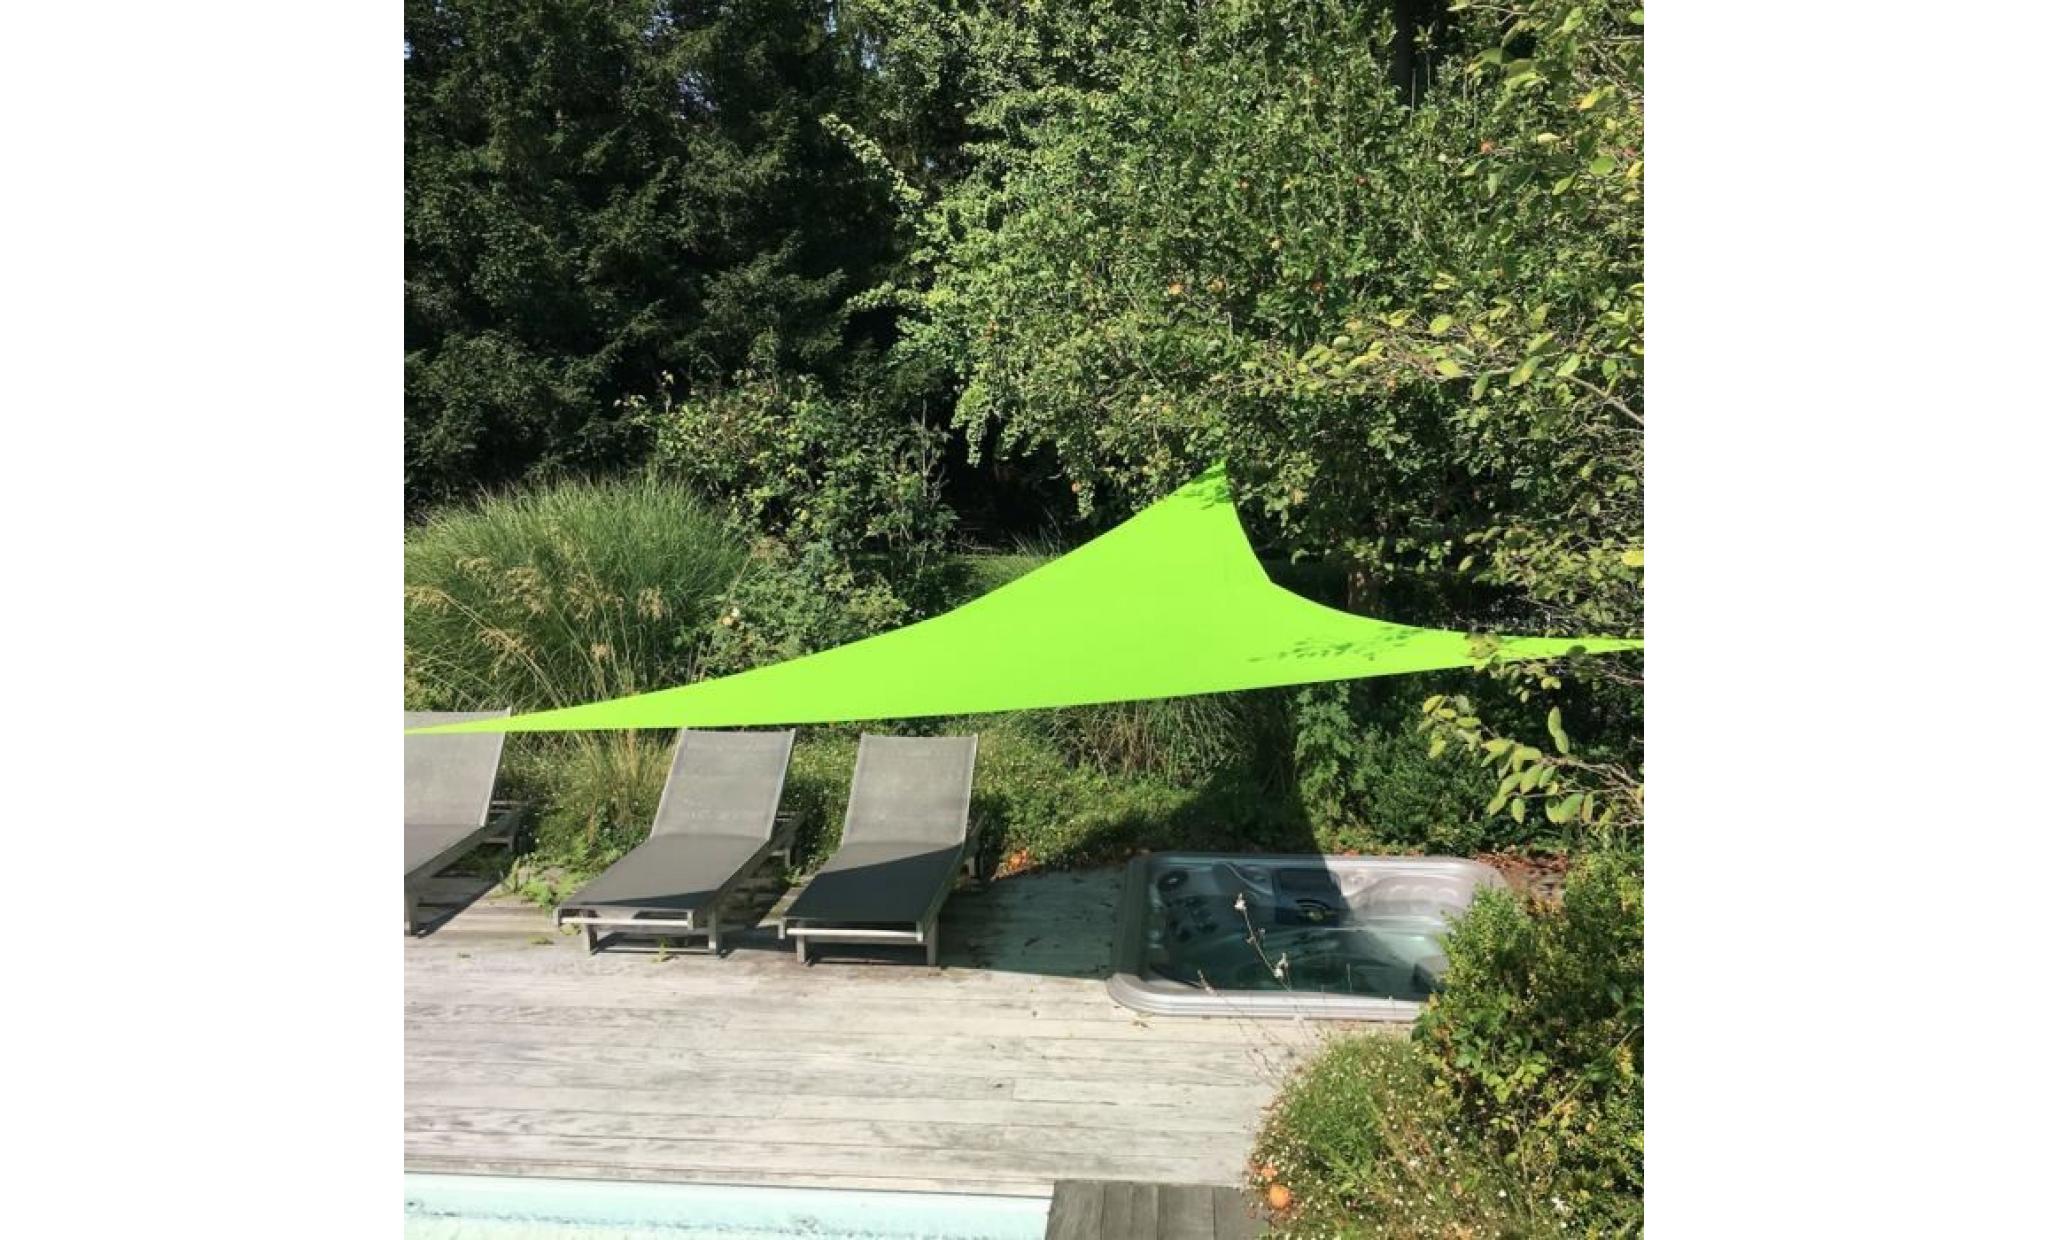 voile d’ombrage triangulaire extensible easywind 4 x 4 x 5,7m   vert   anti uv upf 50+ pas cher